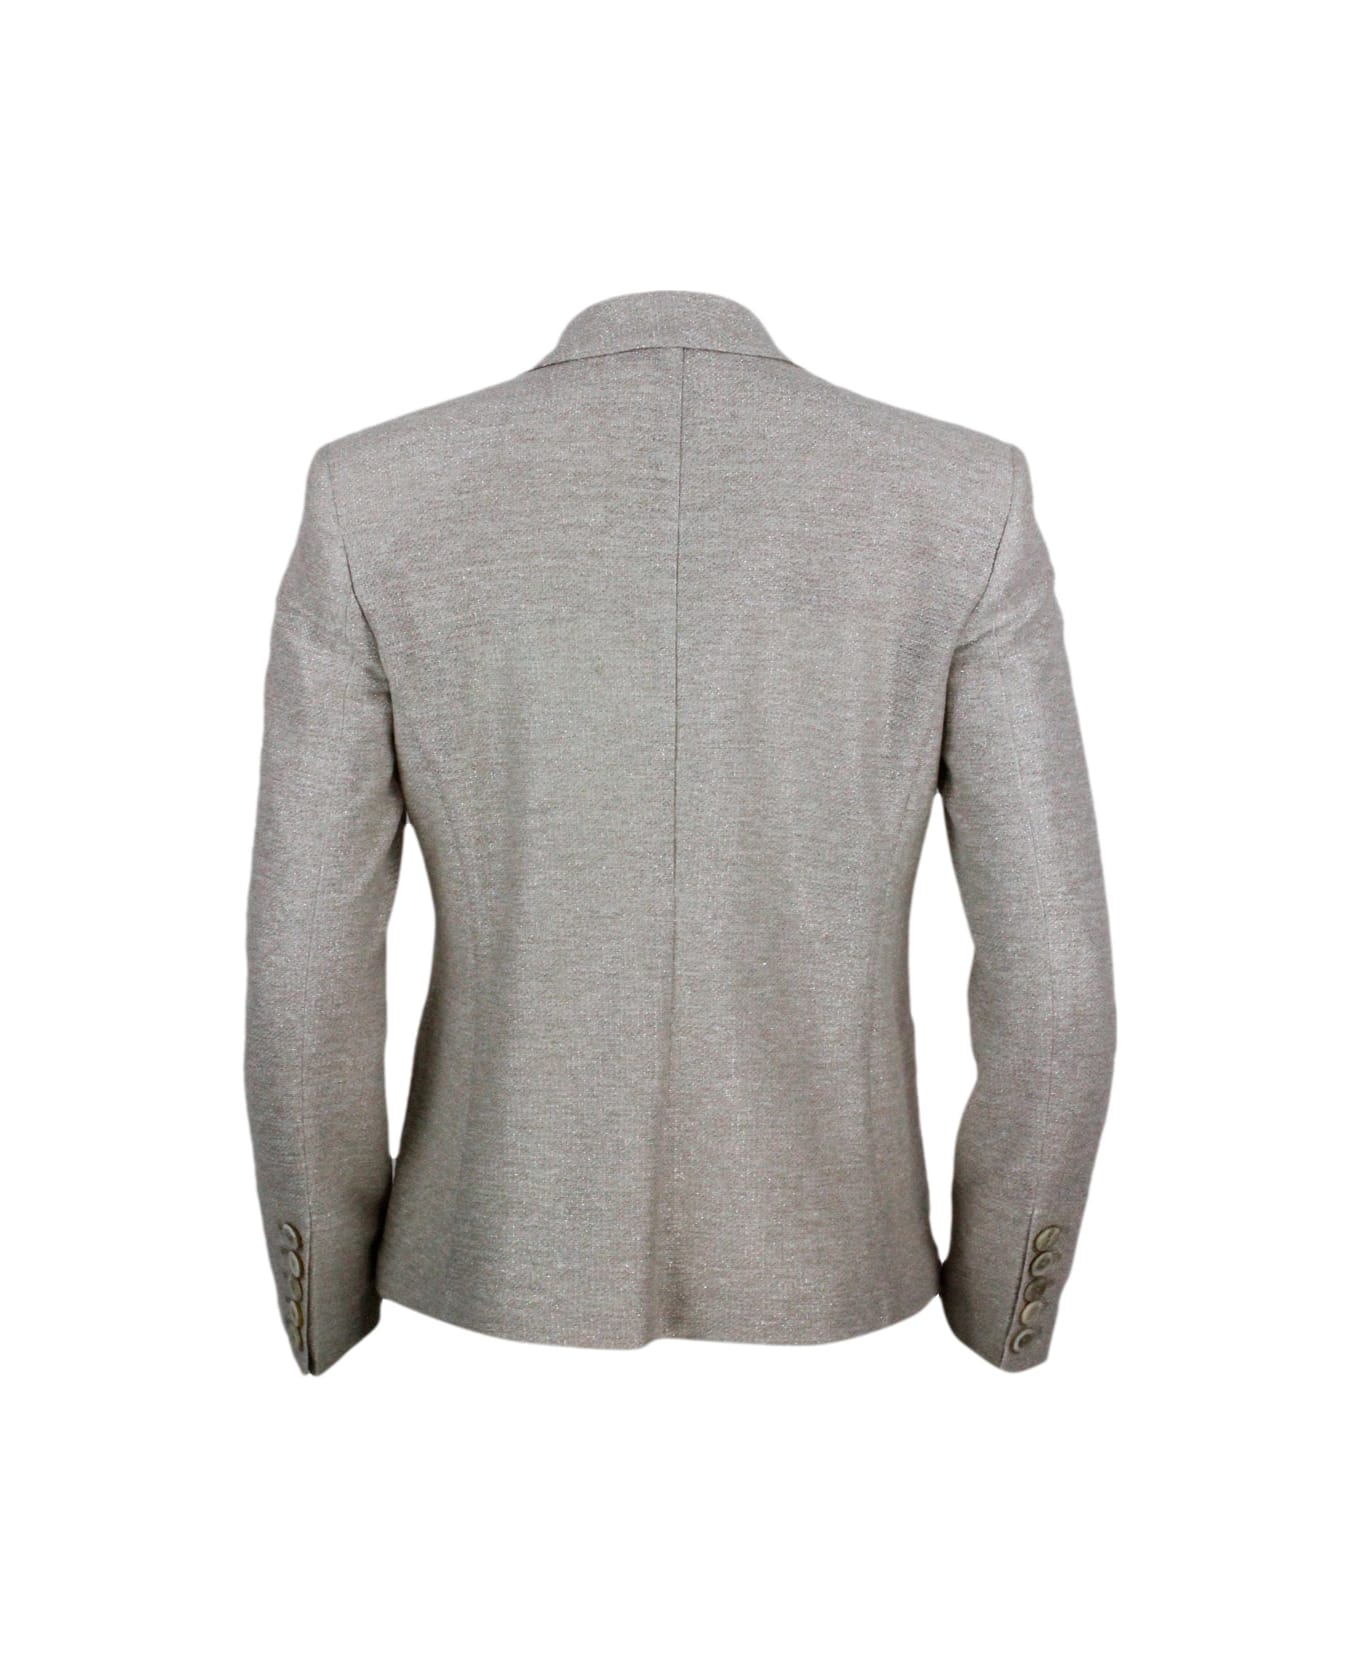 Barba Napoli Single-breasted Two-button Jacket Made Of Linen And Cotton And Embellished With Bright Lurex Threads - Gold